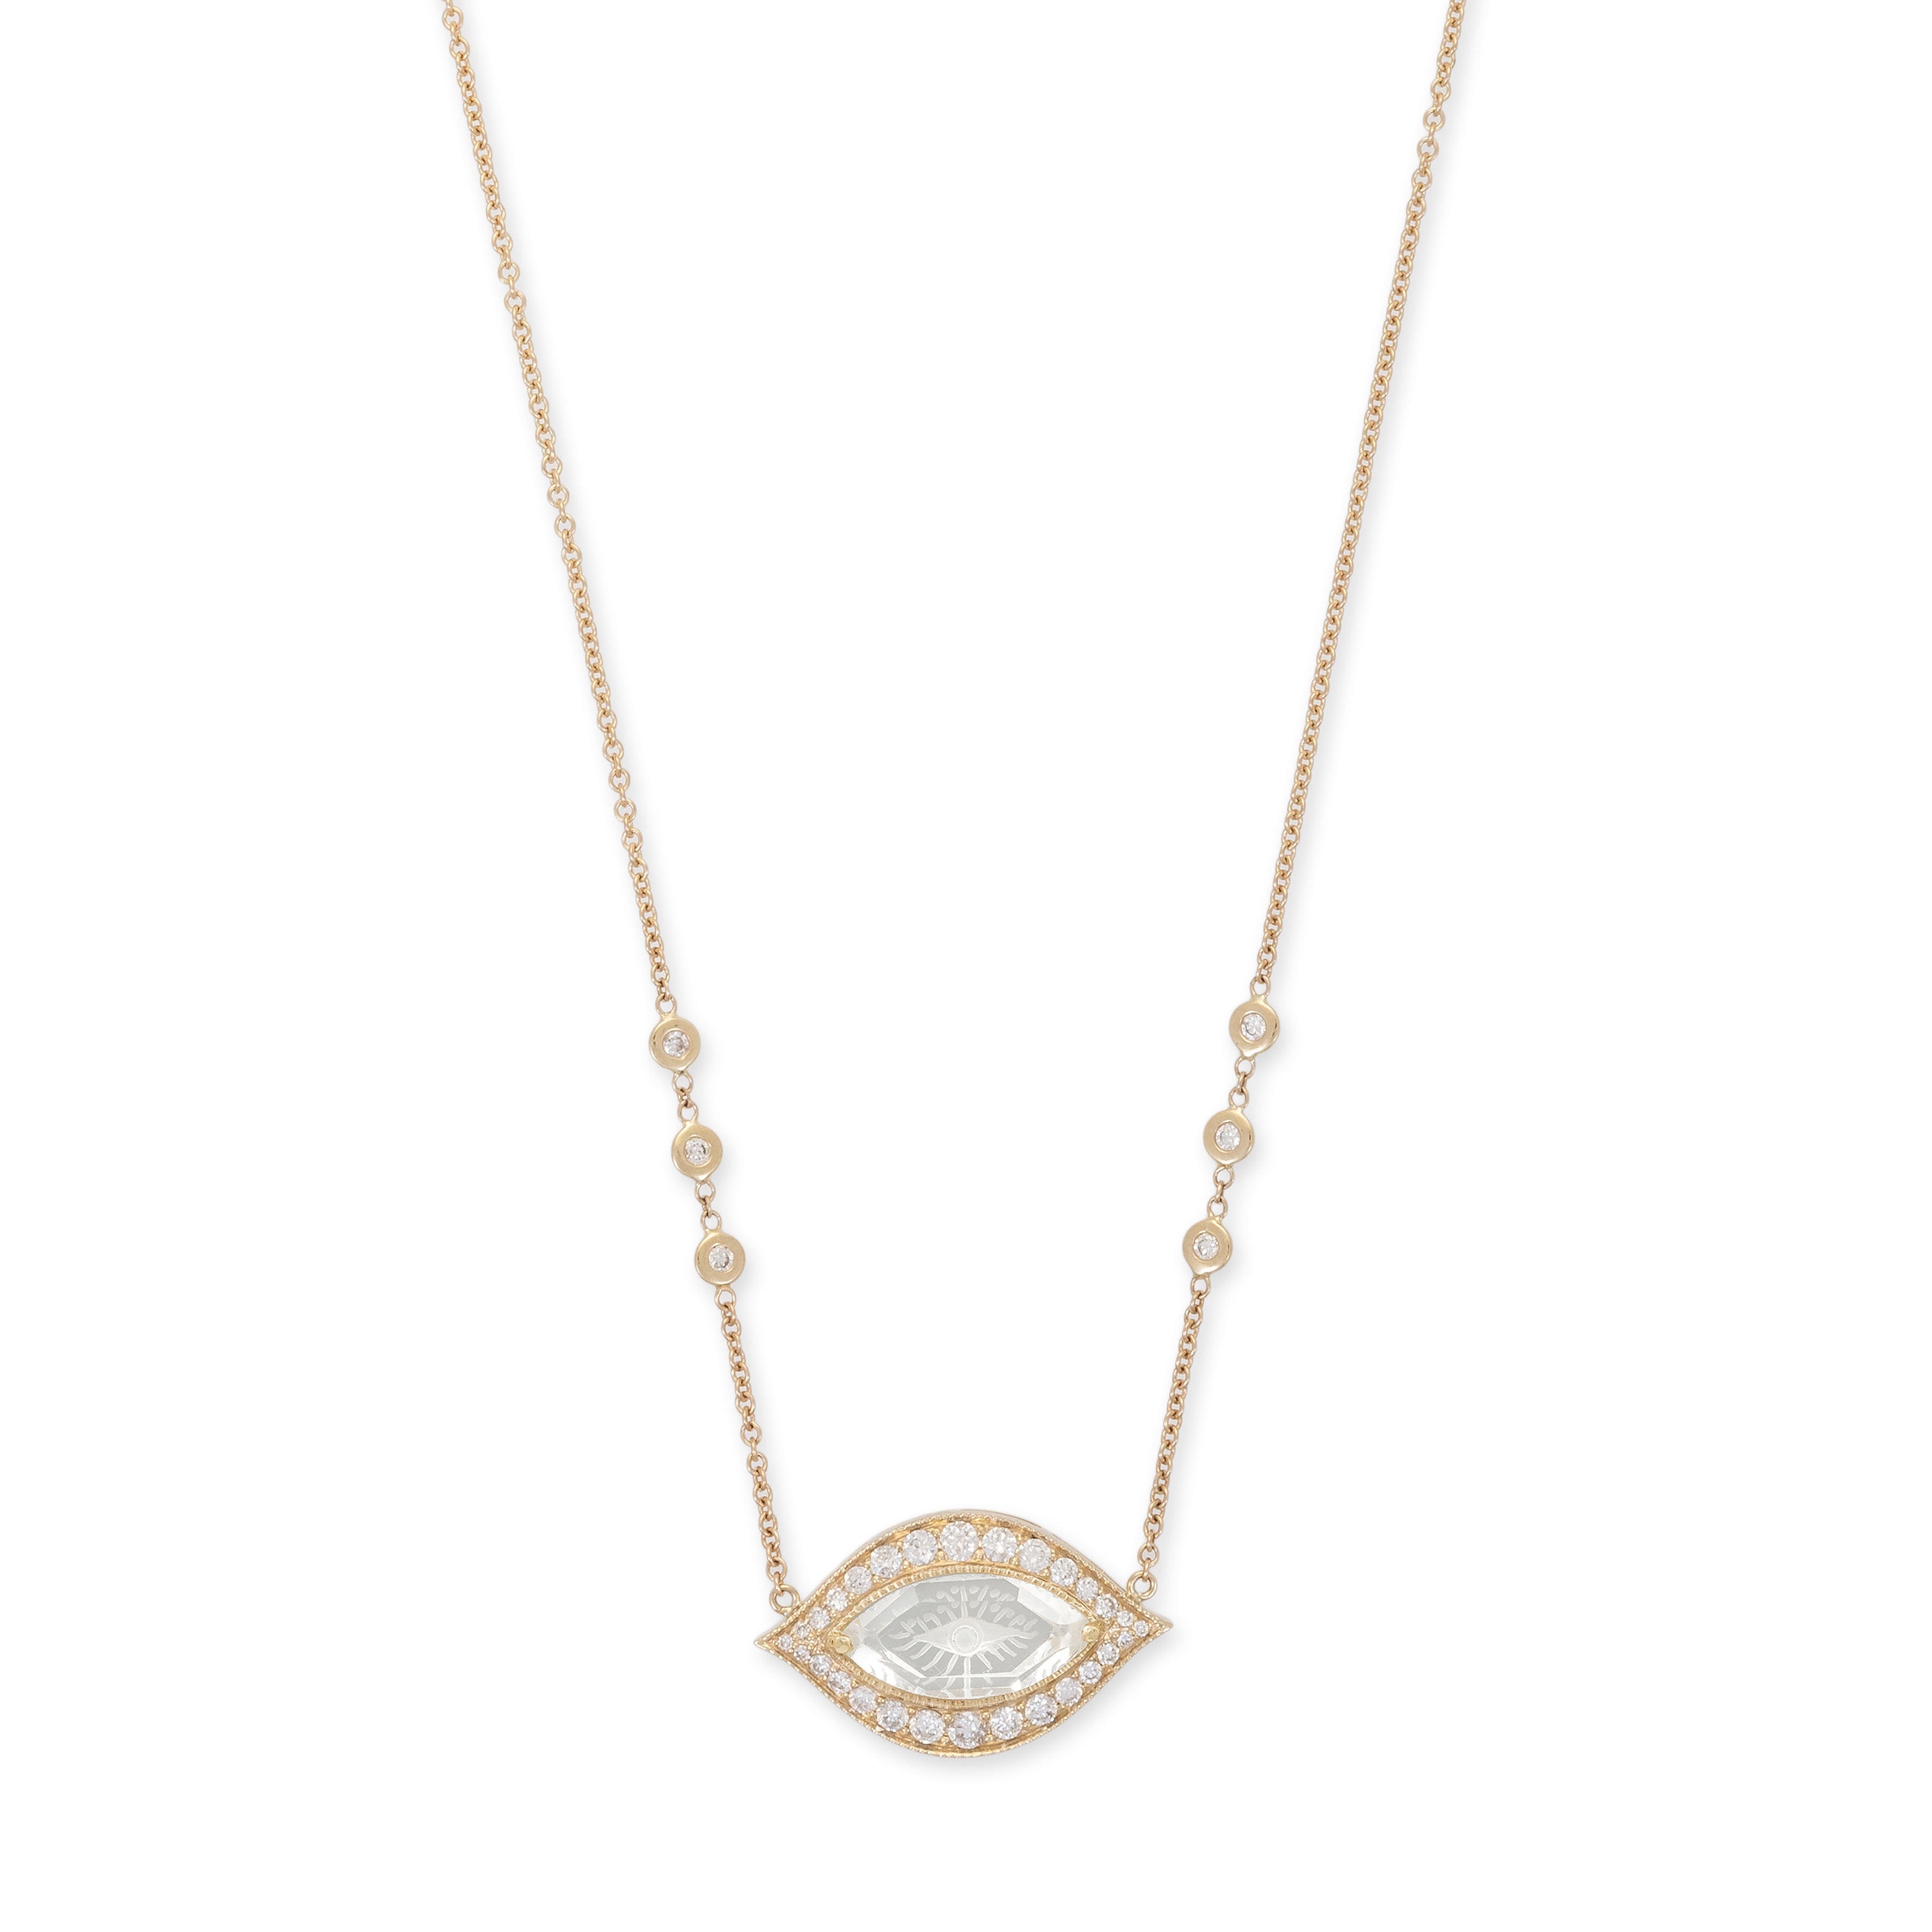 PAVE CARVED EYE BURST CLEAR QUARTZ MARQUISE NECKLACE